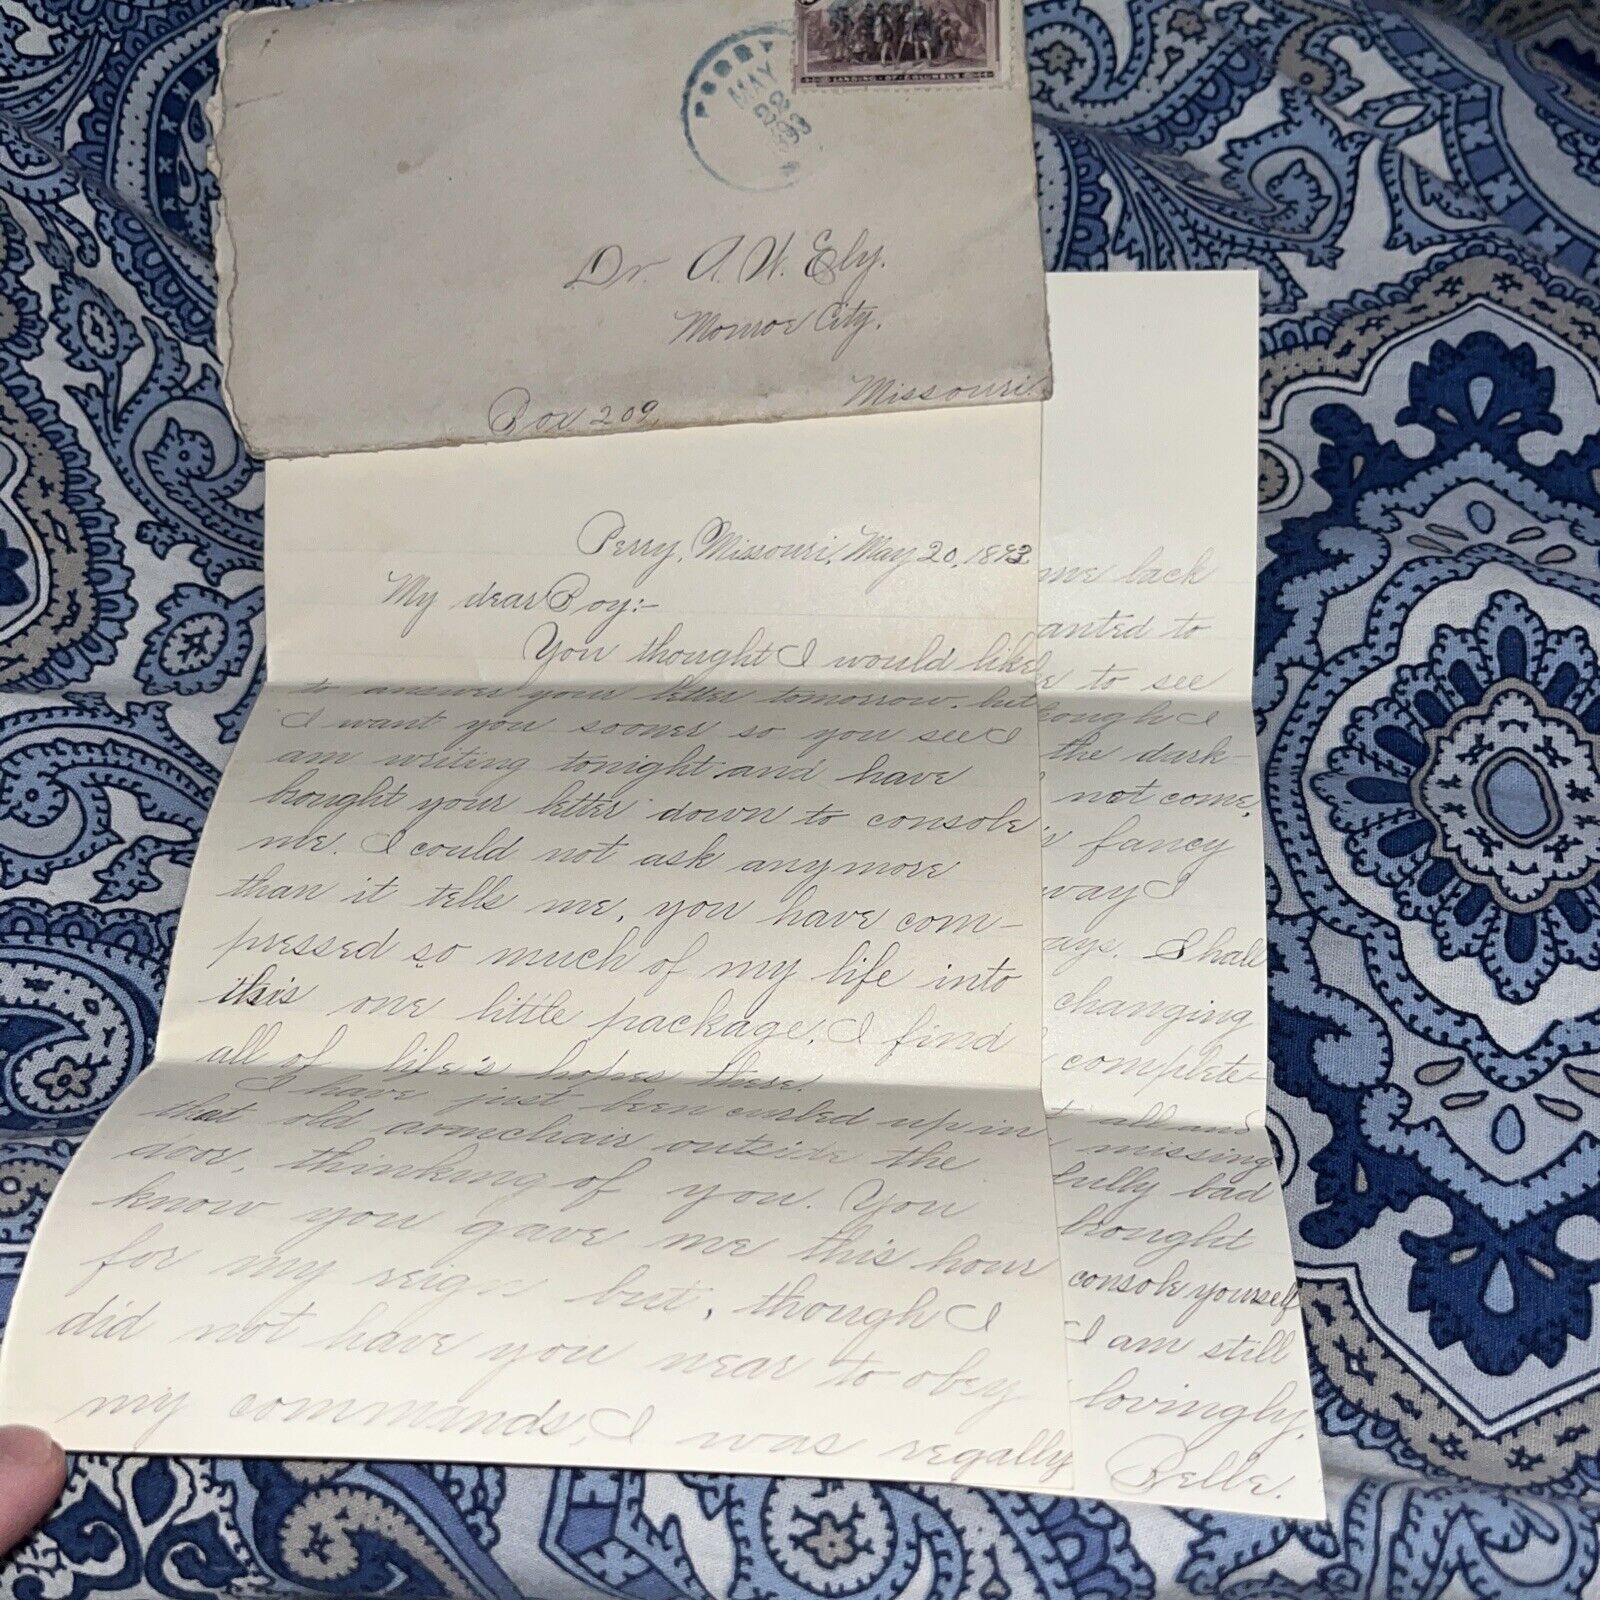 Antique 1893 Saucy Love Letter: Perry MO Doctor to Monroe City “Obey My Commands